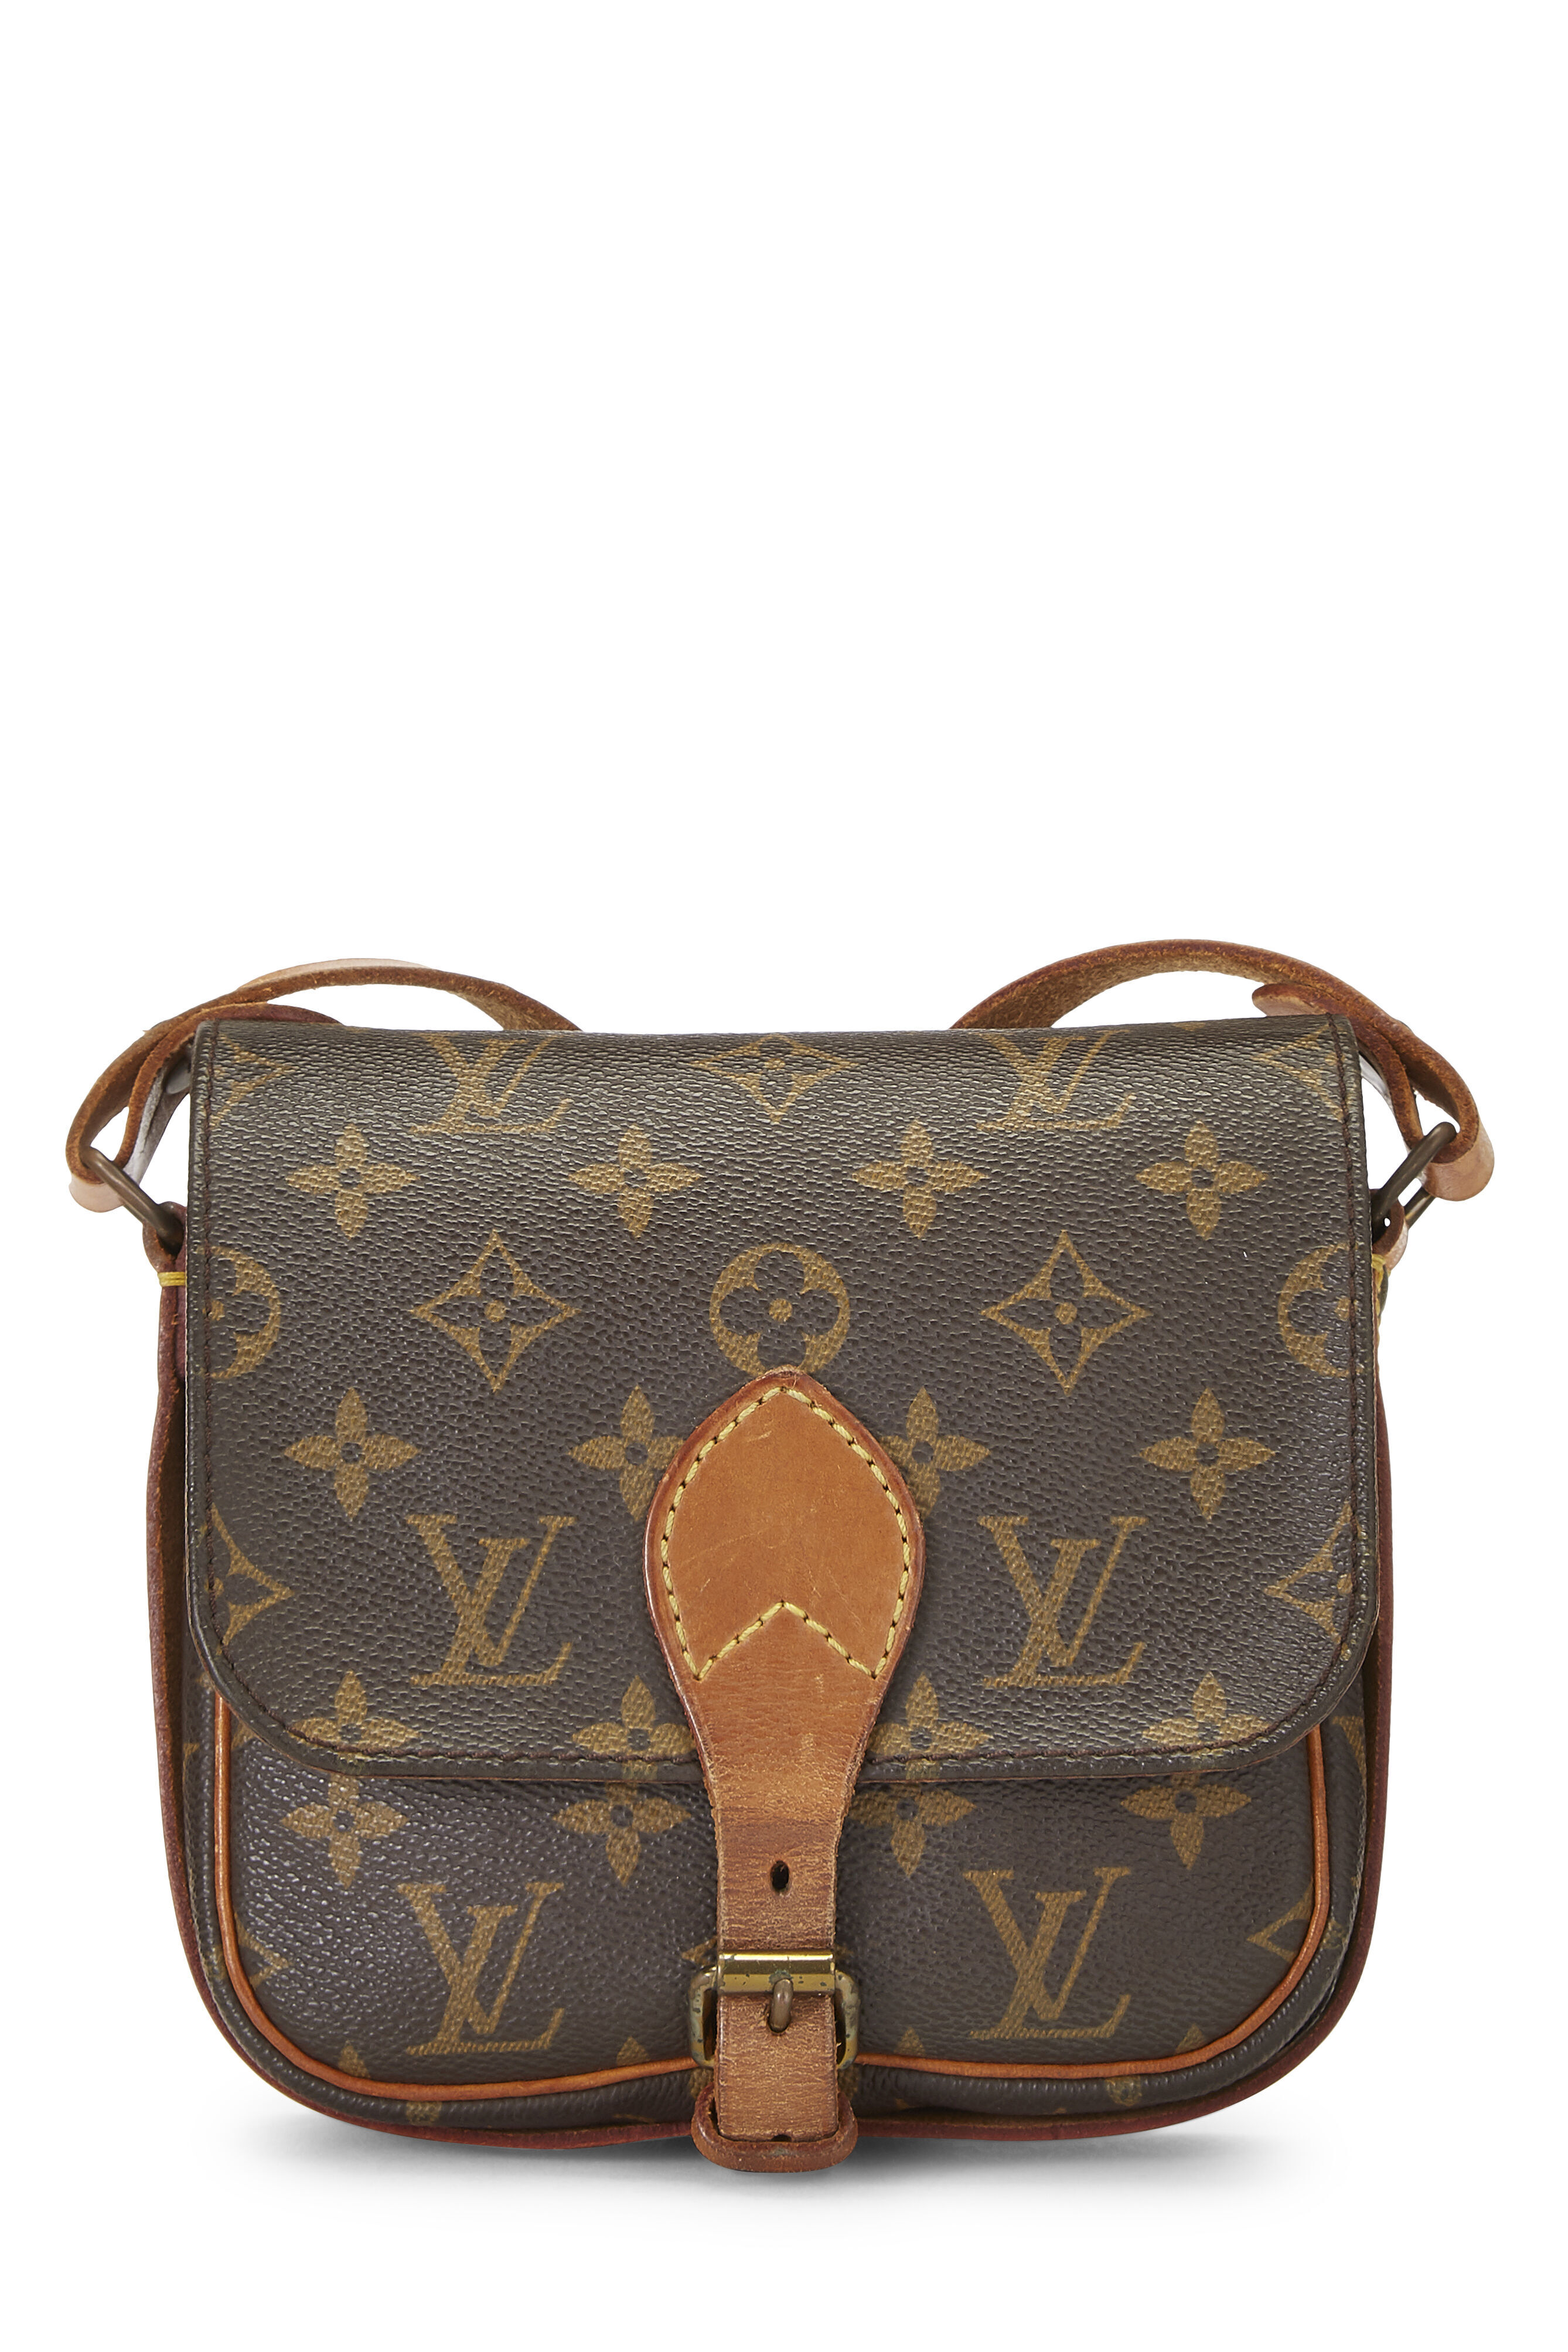 Louis Vuitton Cartouchiere Canvas Shoulder Bag (pre-owned) in Gray